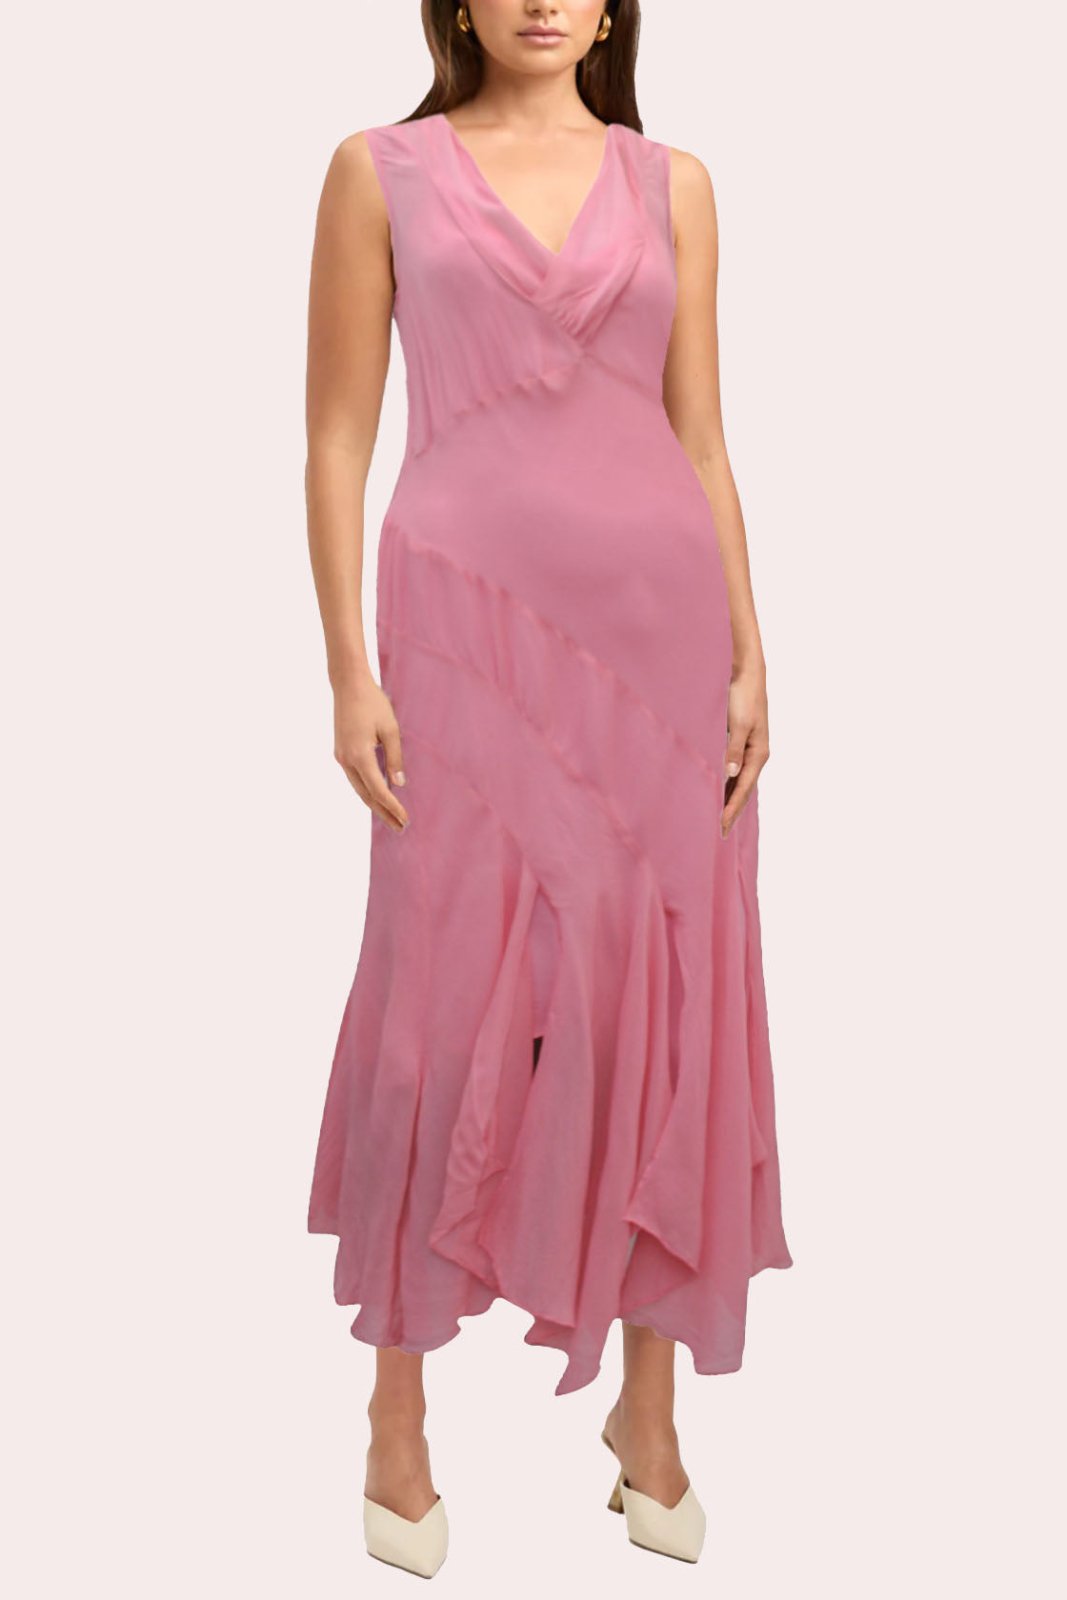 Together Pink Plus Size Sleeveless Asymmetric Ruffle Dress - Curvy Chic Boutique